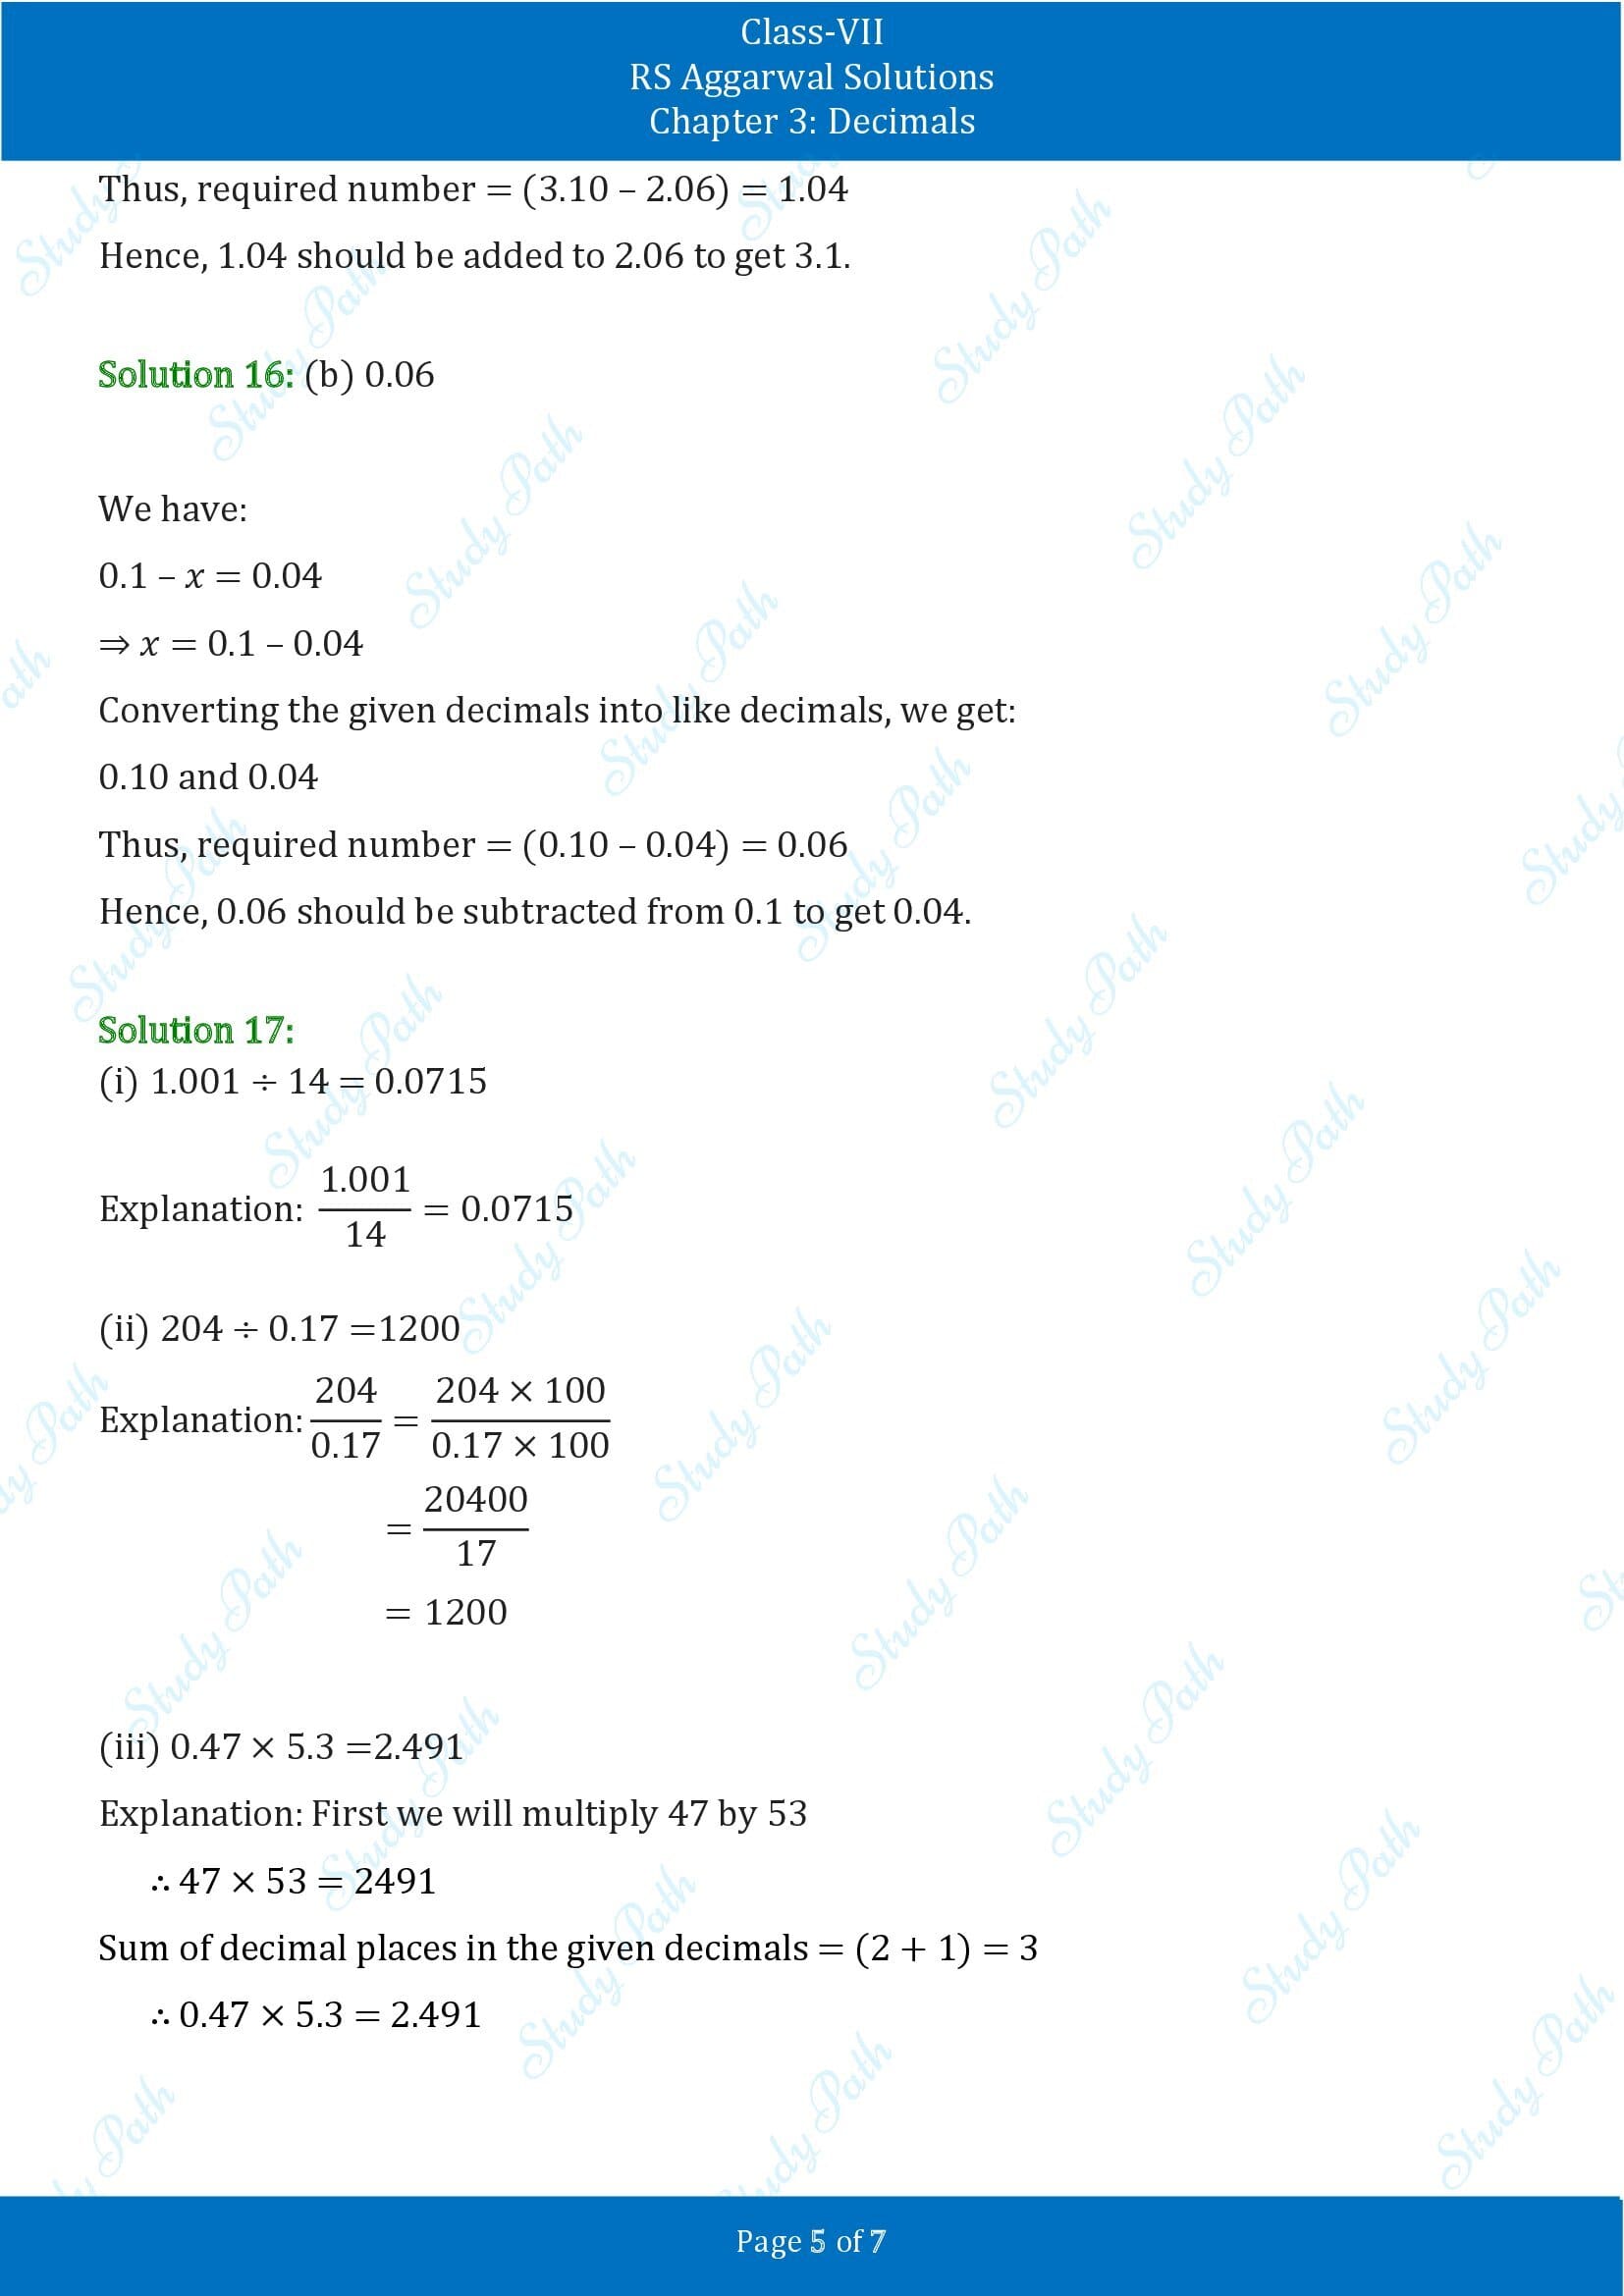 RS Aggarwal Solutions Class 7 Chapter 3 Decimals Test Paper 00005